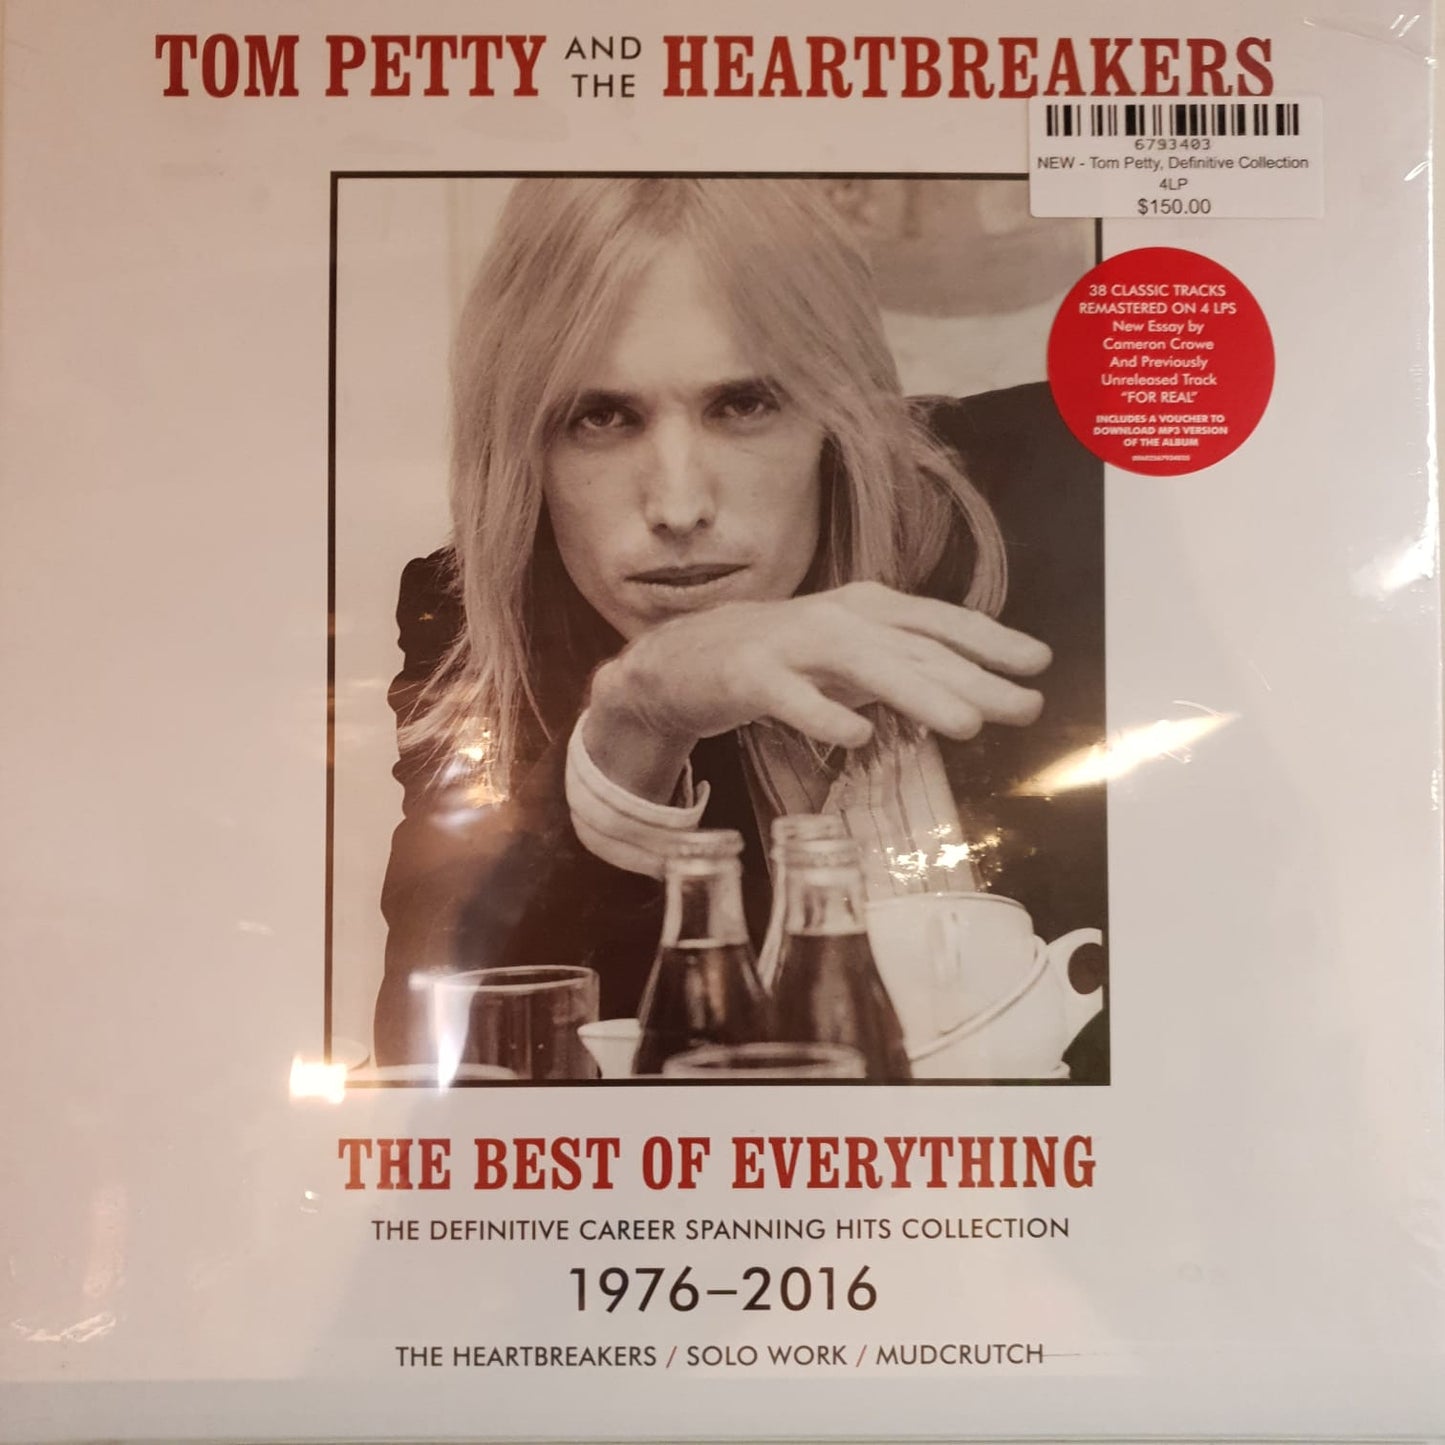 NEW - Tom Petty and the Heartbreakers, The  Definitive Collection 4 LP